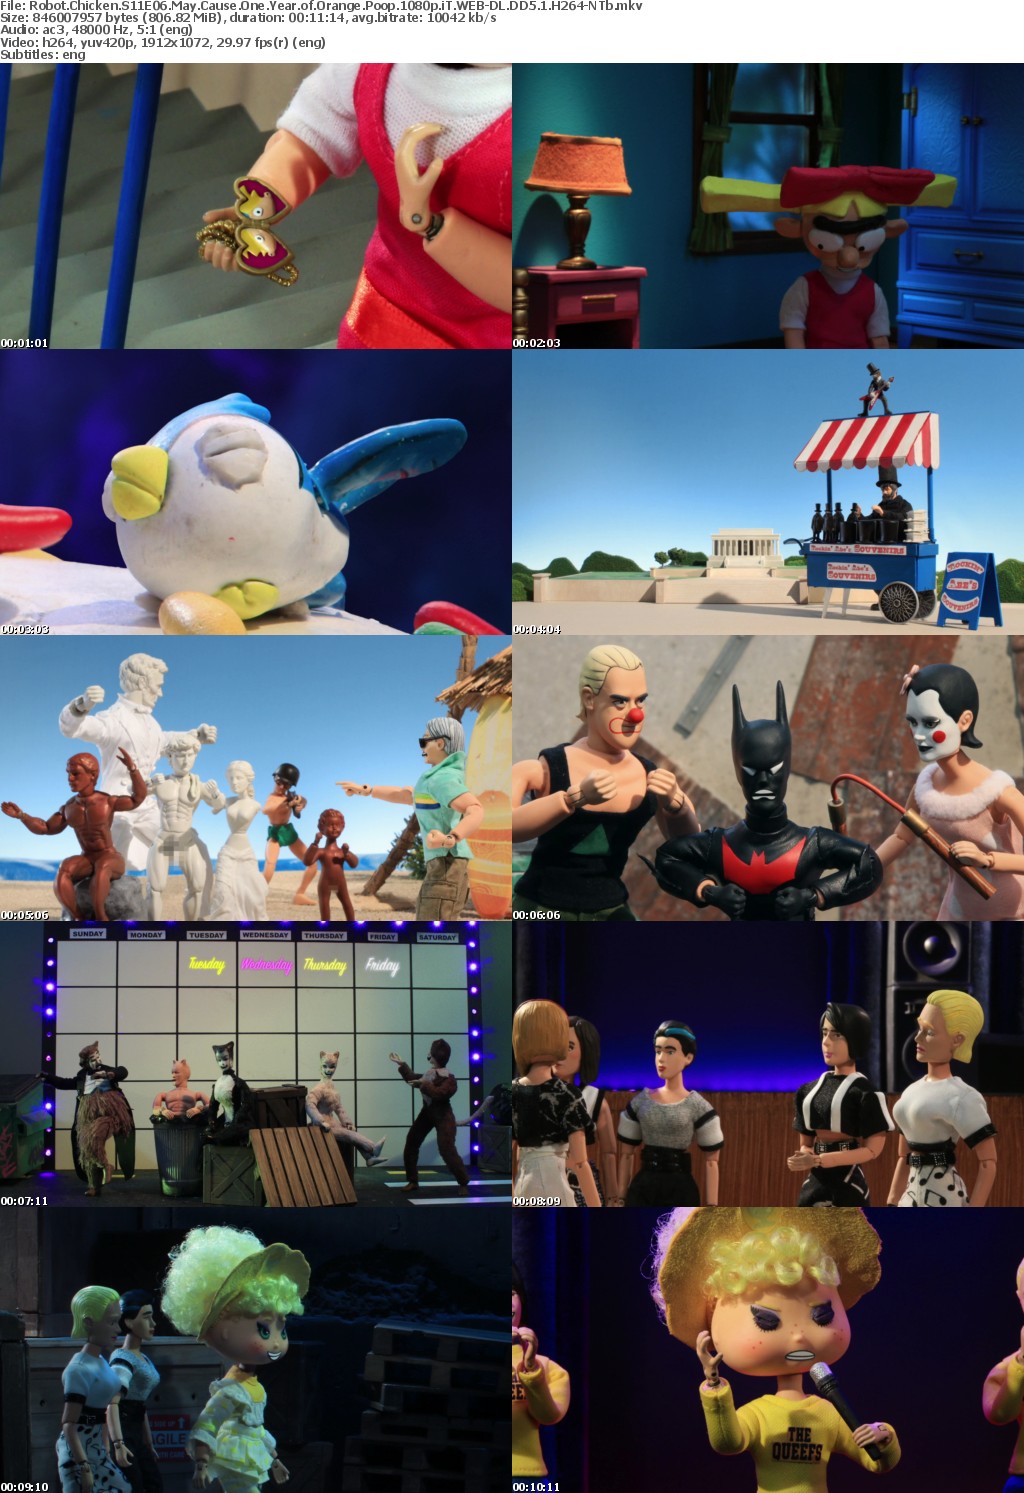 Robot Chicken S11E06 May Cause One Year of Orange Poop 1080p WEB-DL DD5 1 H264-NTb